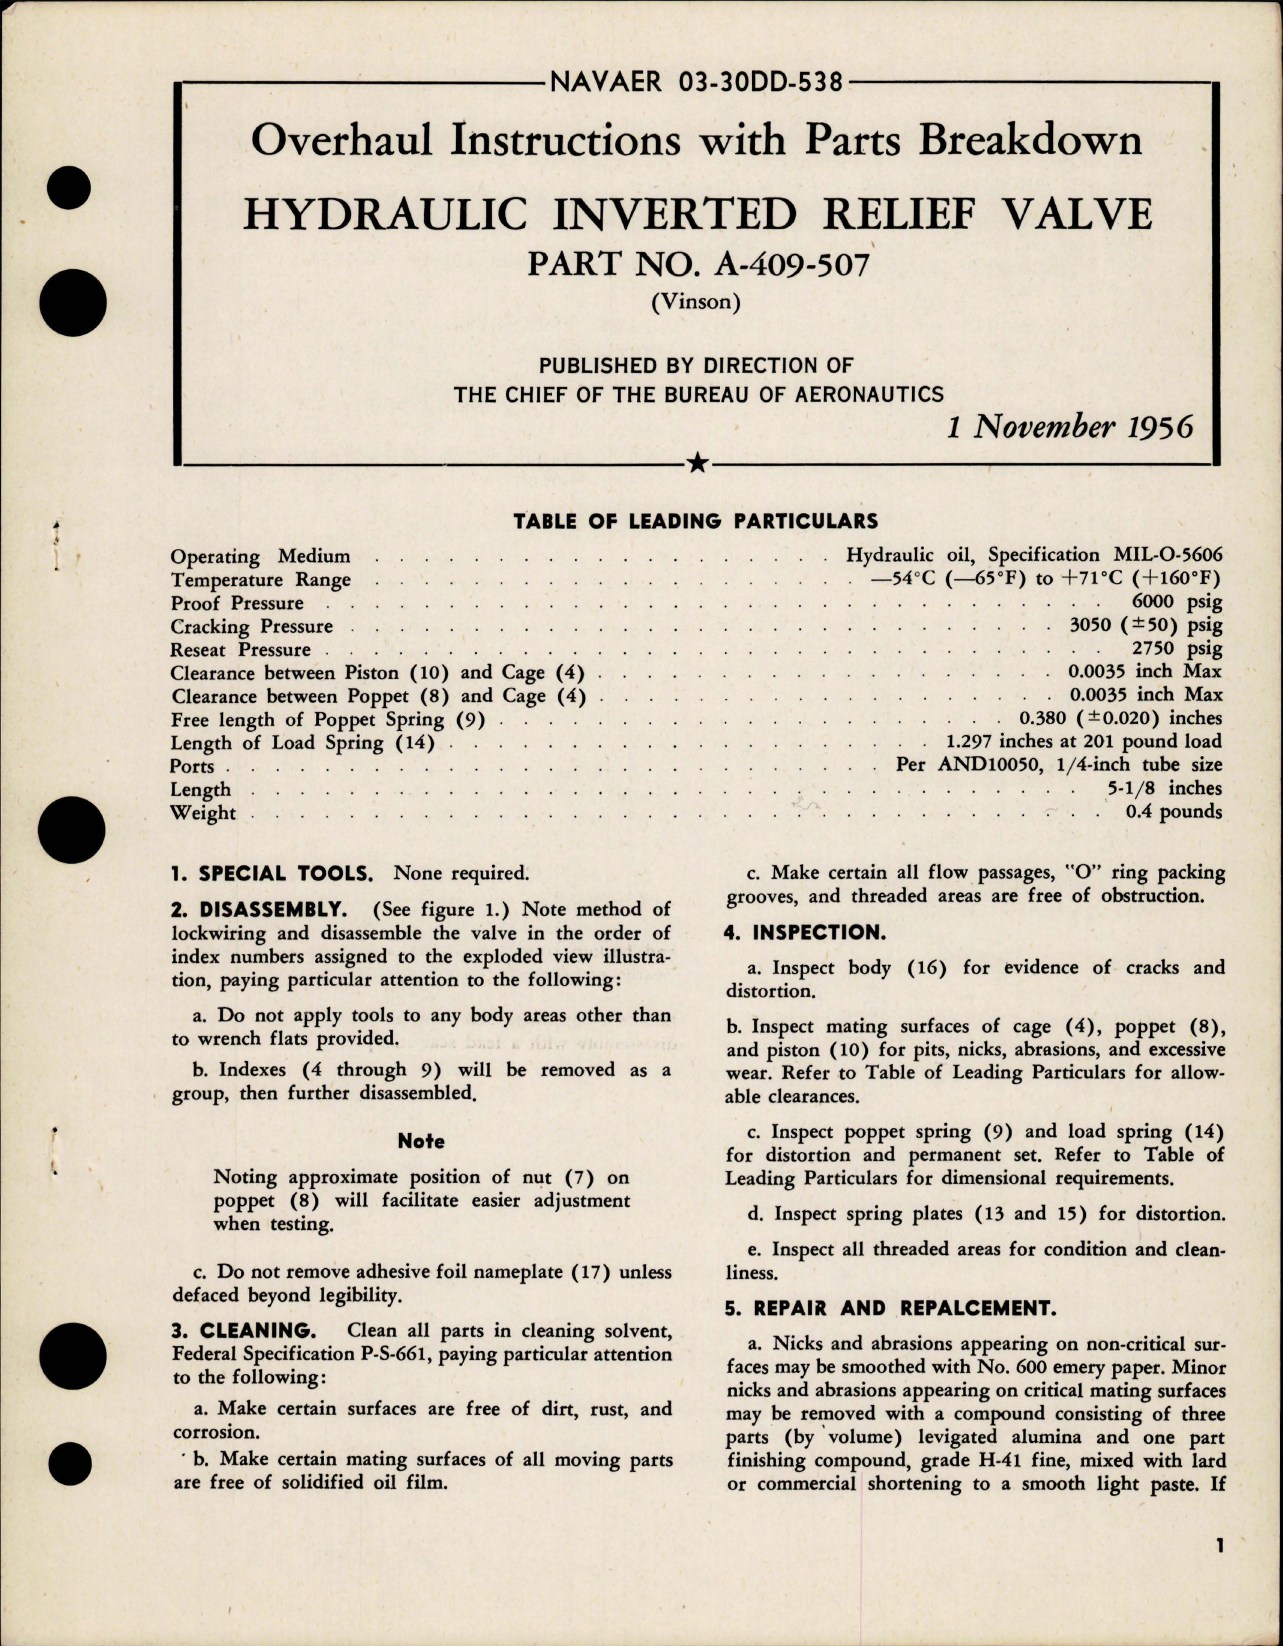 Sample page 1 from AirCorps Library document: Overhaul Instructions with Parts Breakdown for Hydraulic Inverted Relief Valve - Part A-409-507